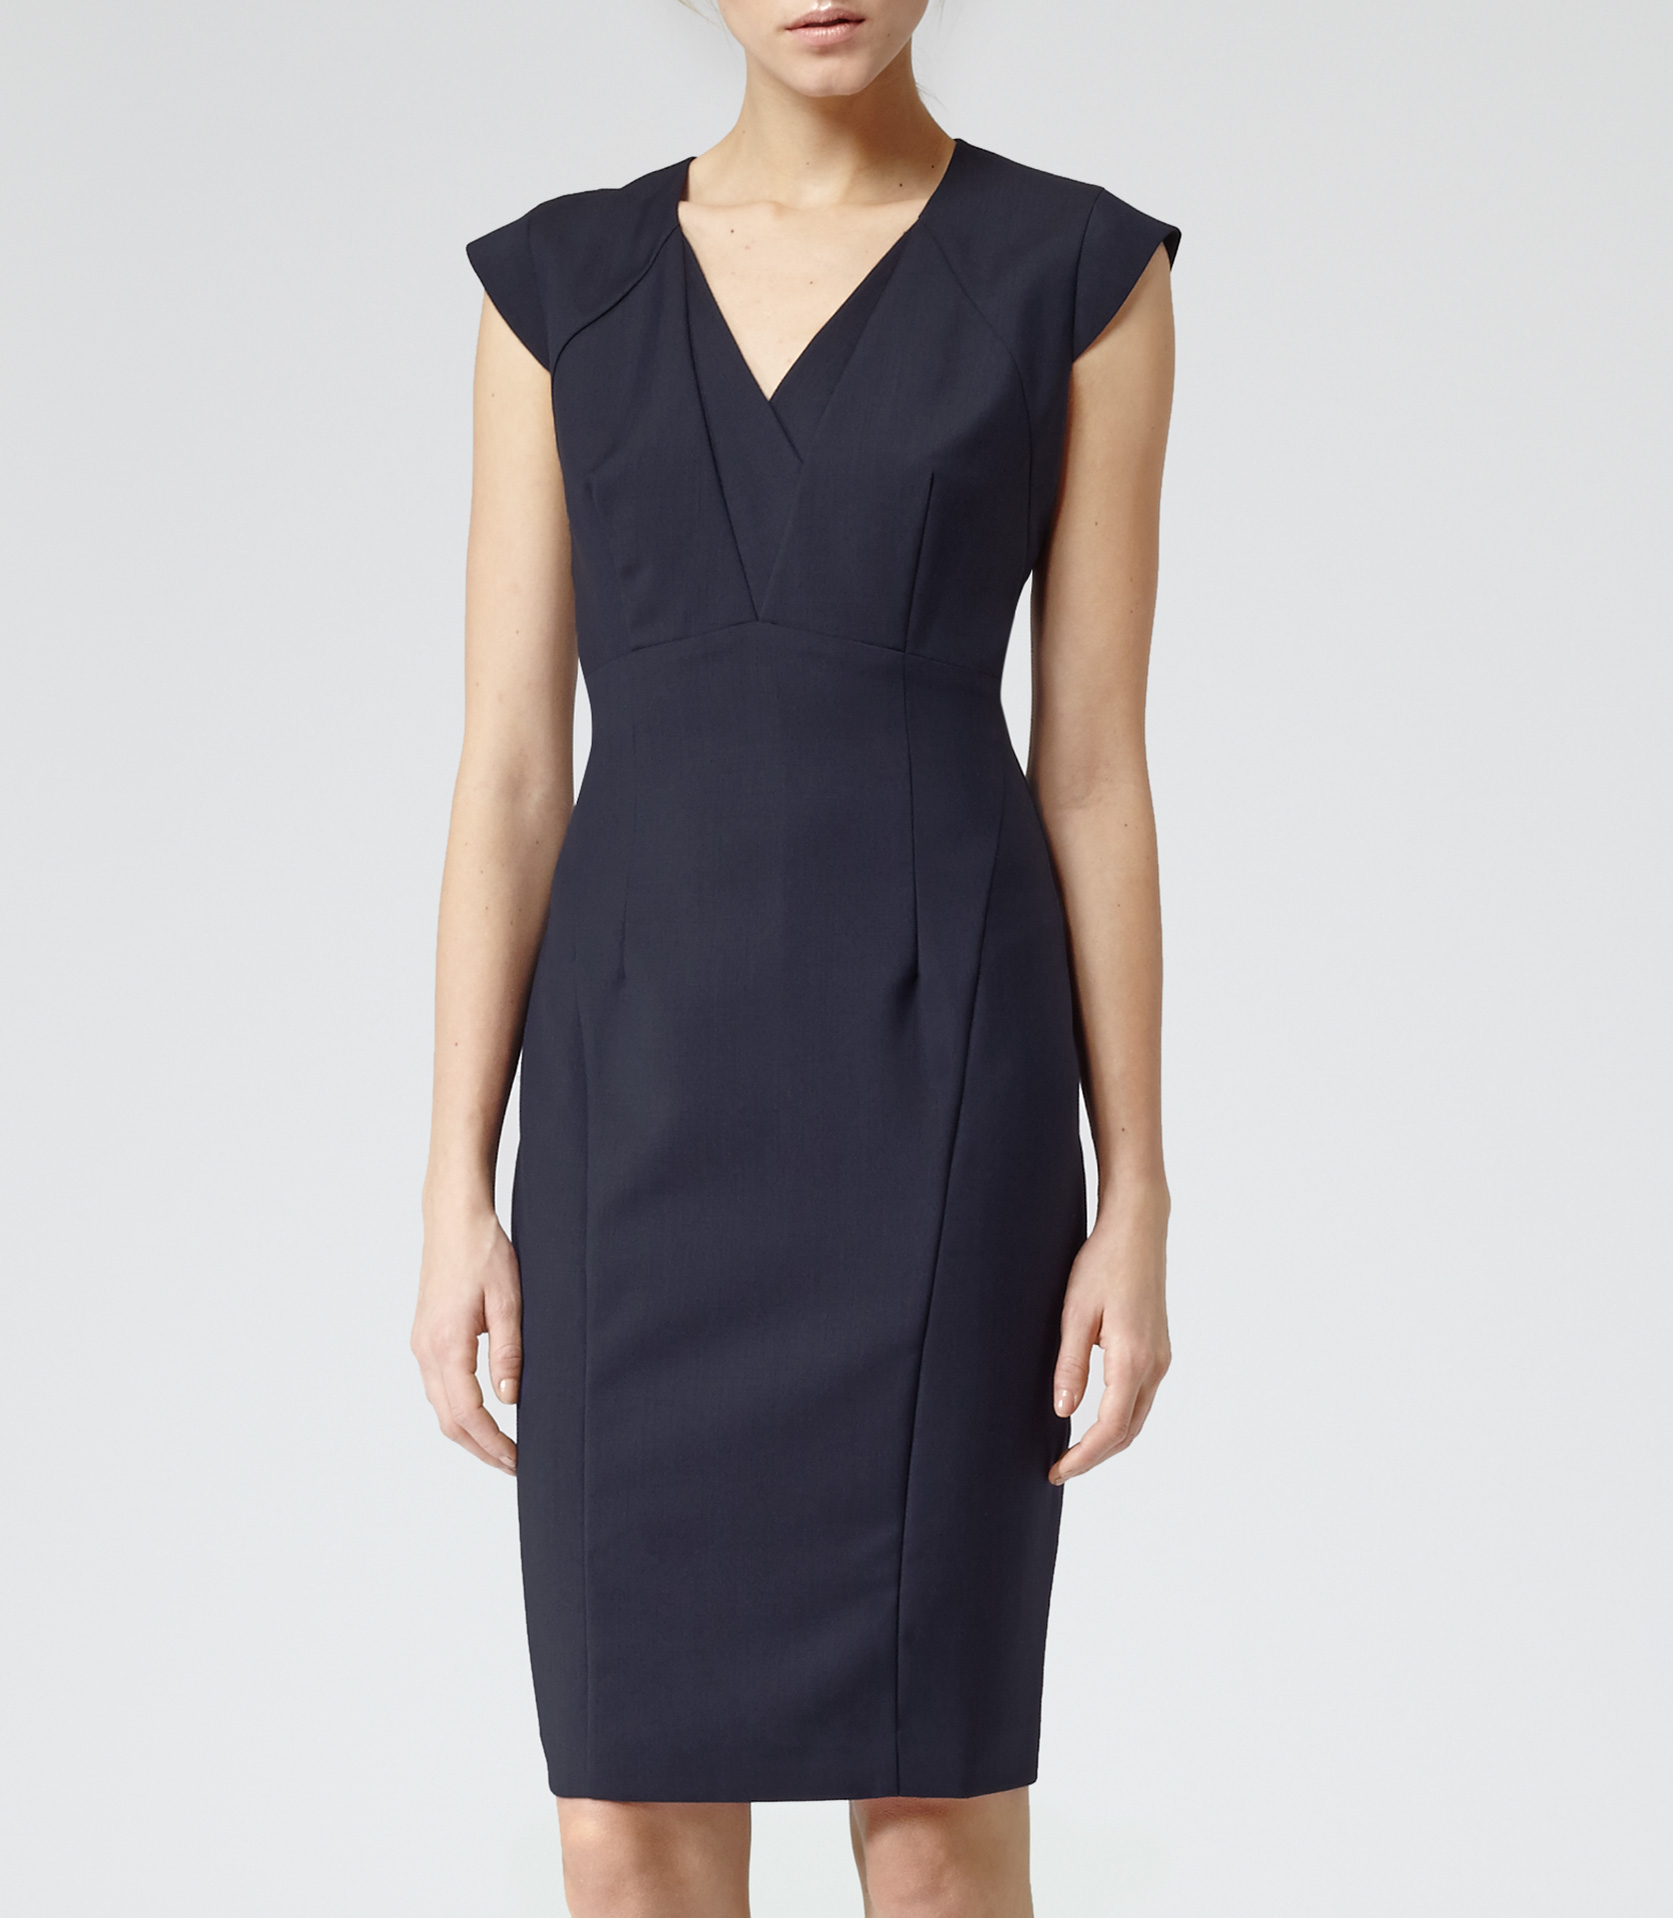 Lyst - Reiss Renee Fit And Flare Dress in Blue